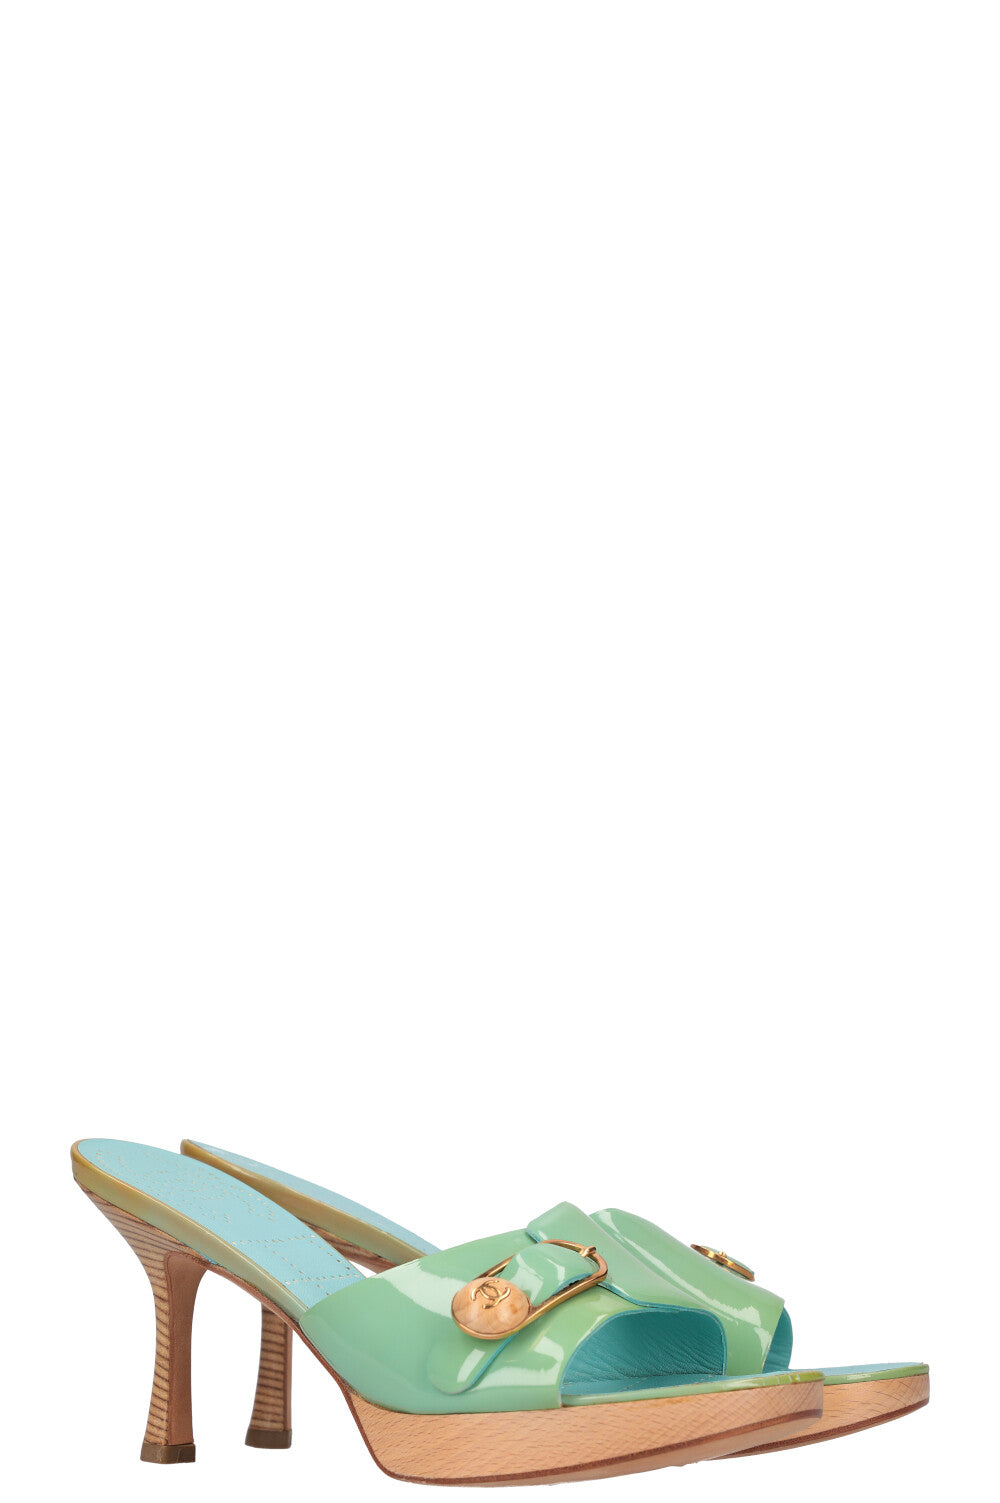 CHANEL Wooden Heels Patent Turquoise 03C